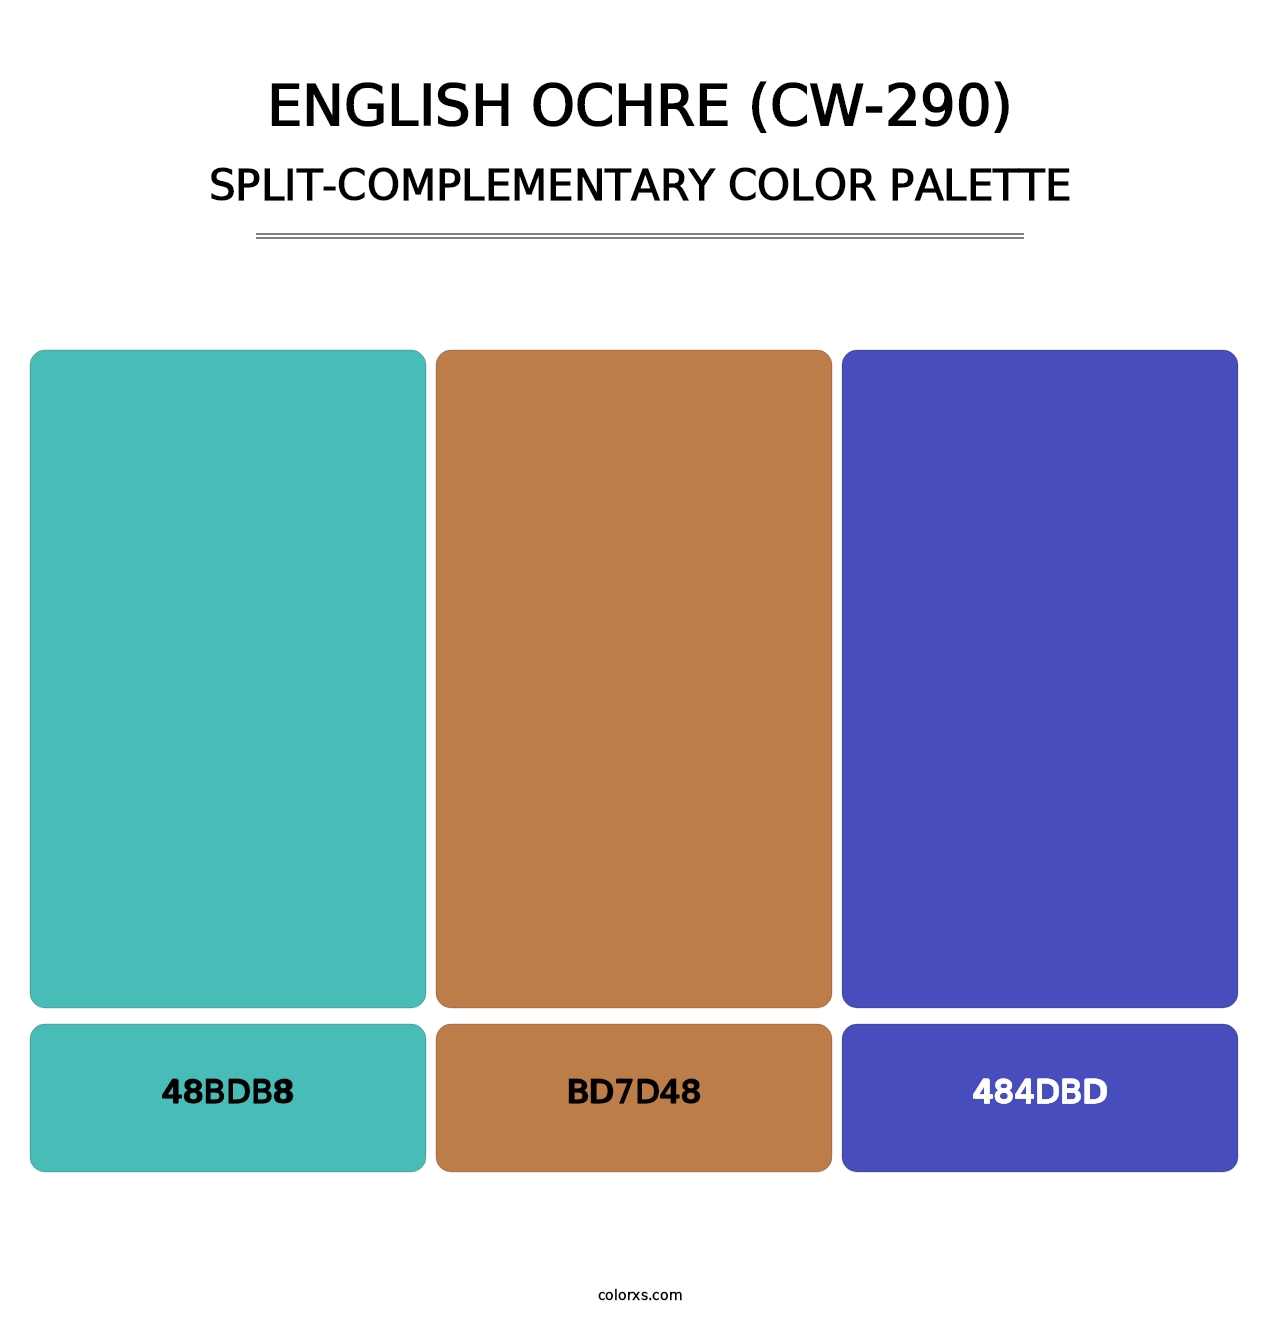 English Ochre (CW-290) - Split-Complementary Color Palette